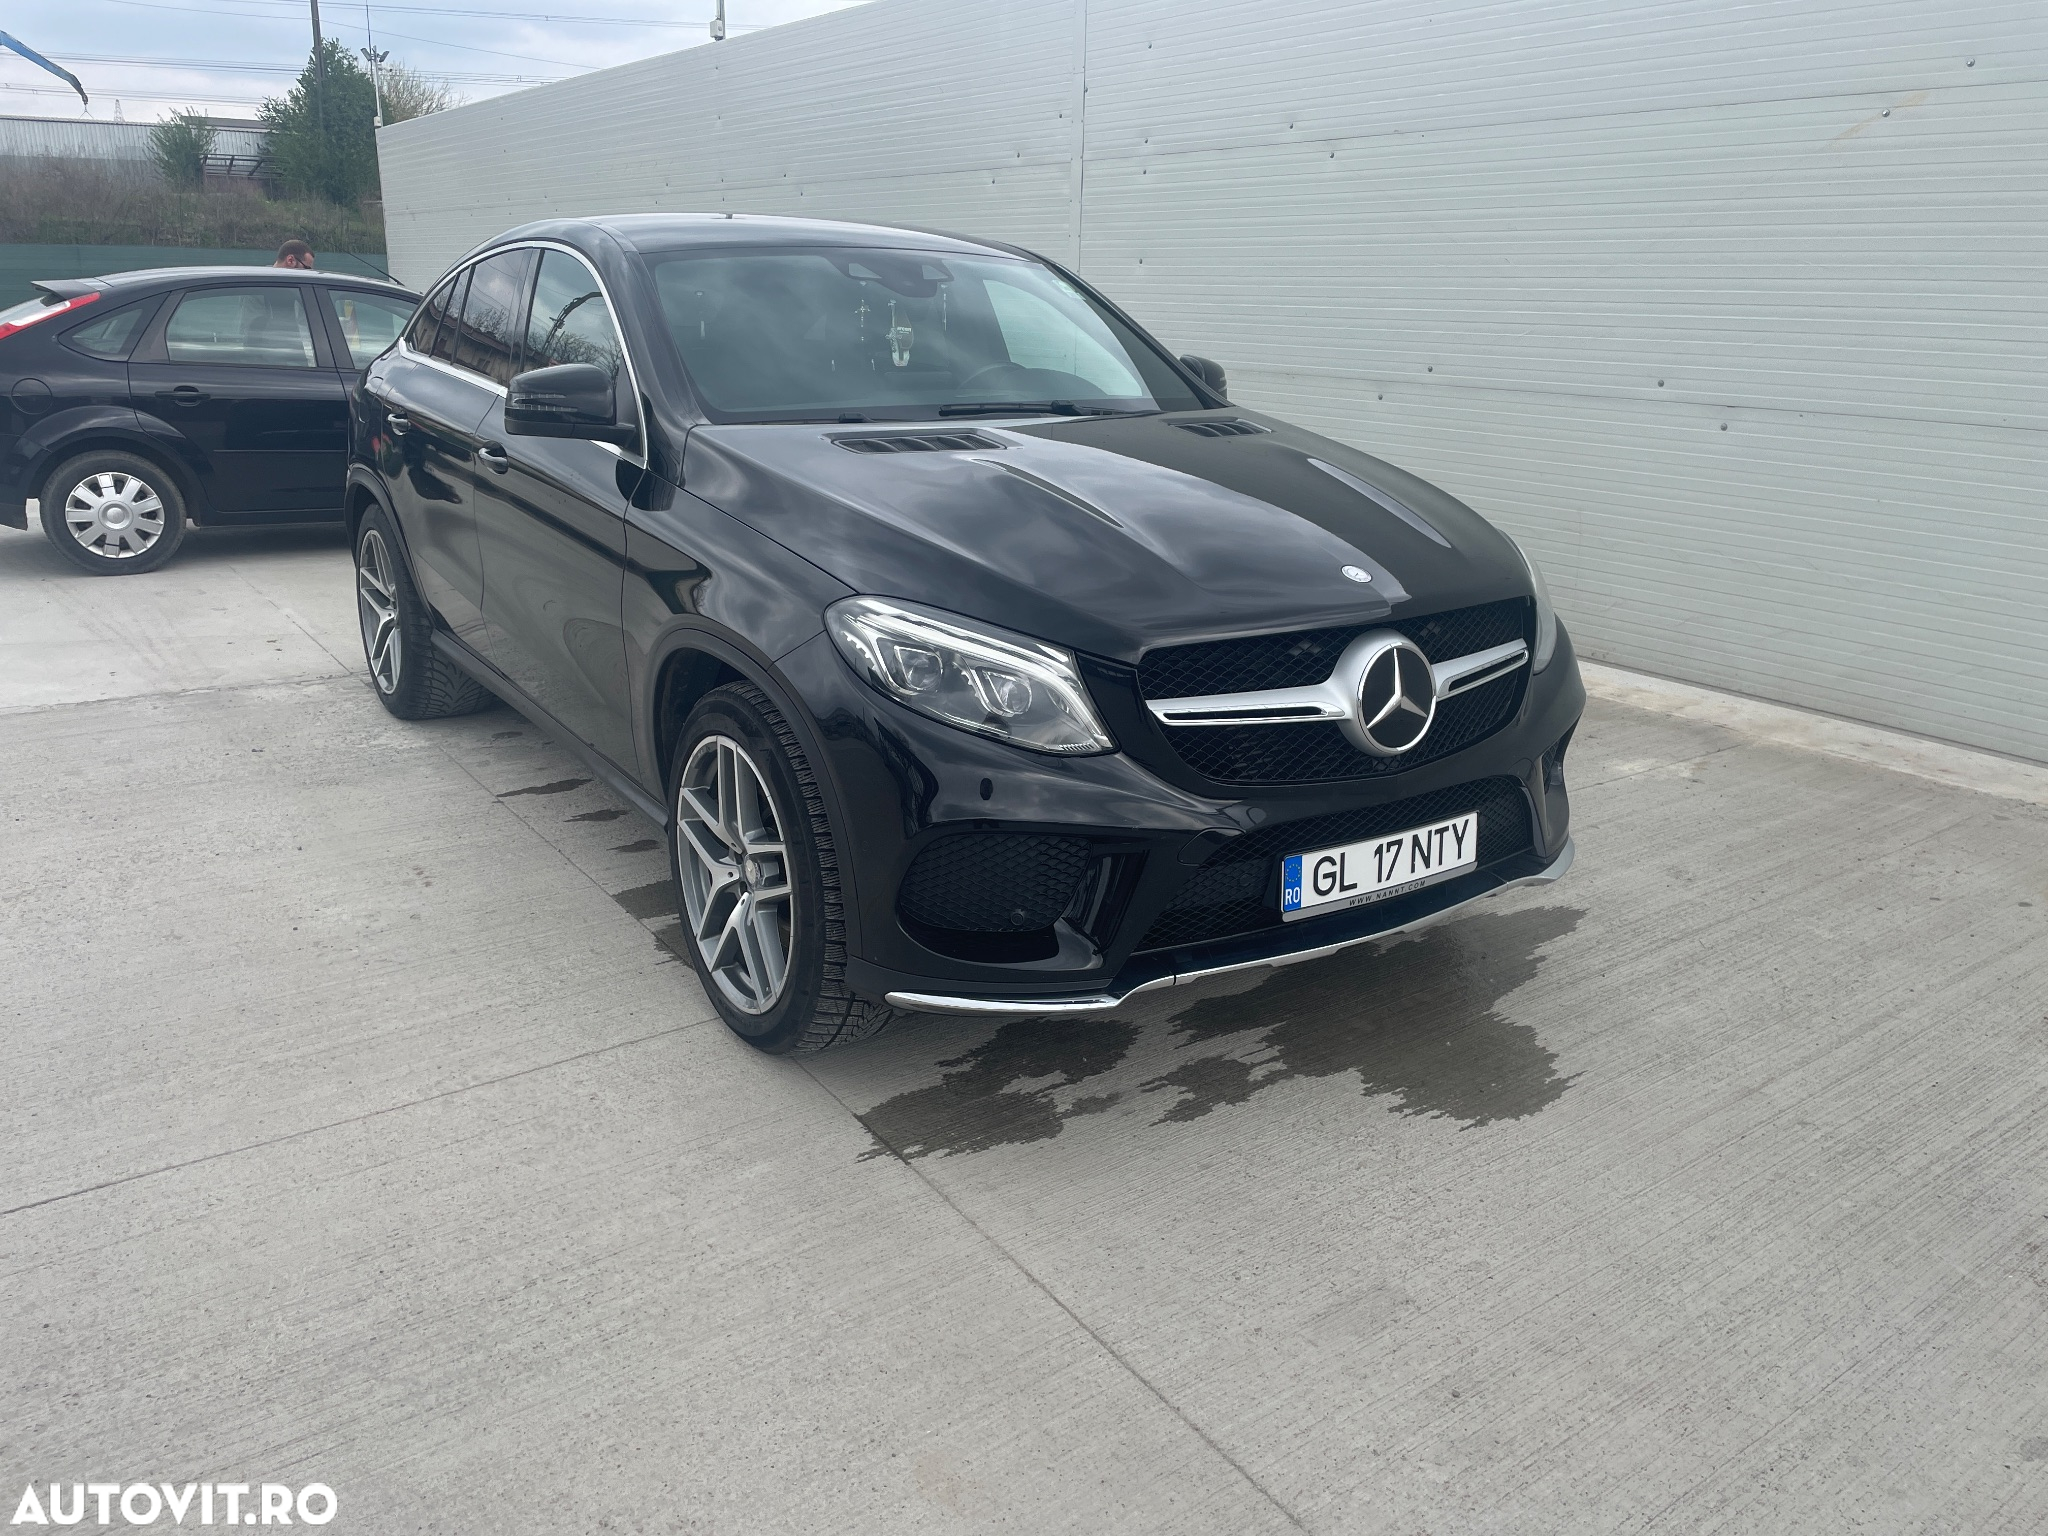 Mercedes-Benz GLE Coupe 350 d 4Matic 9G-TRONIC - 6